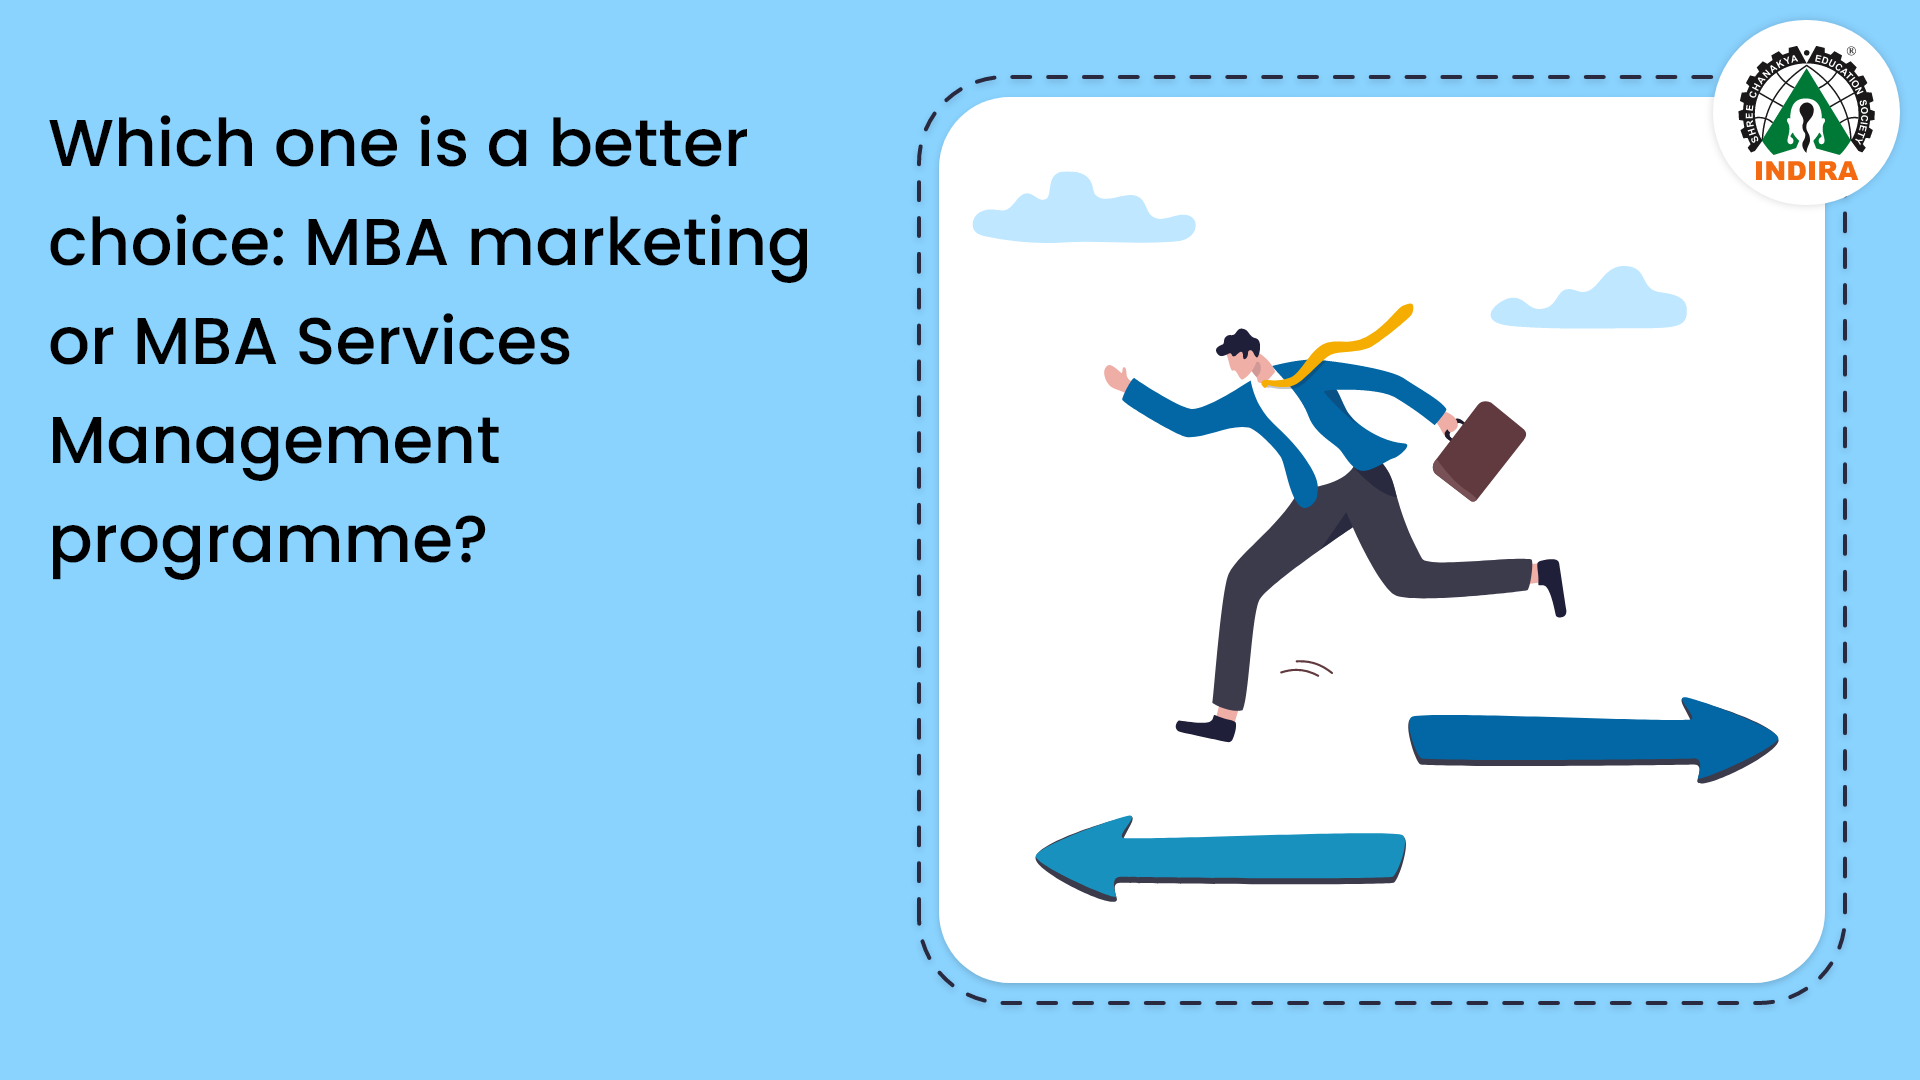 Which one is a better choice: MBA marketing or MBA Services Management programme?